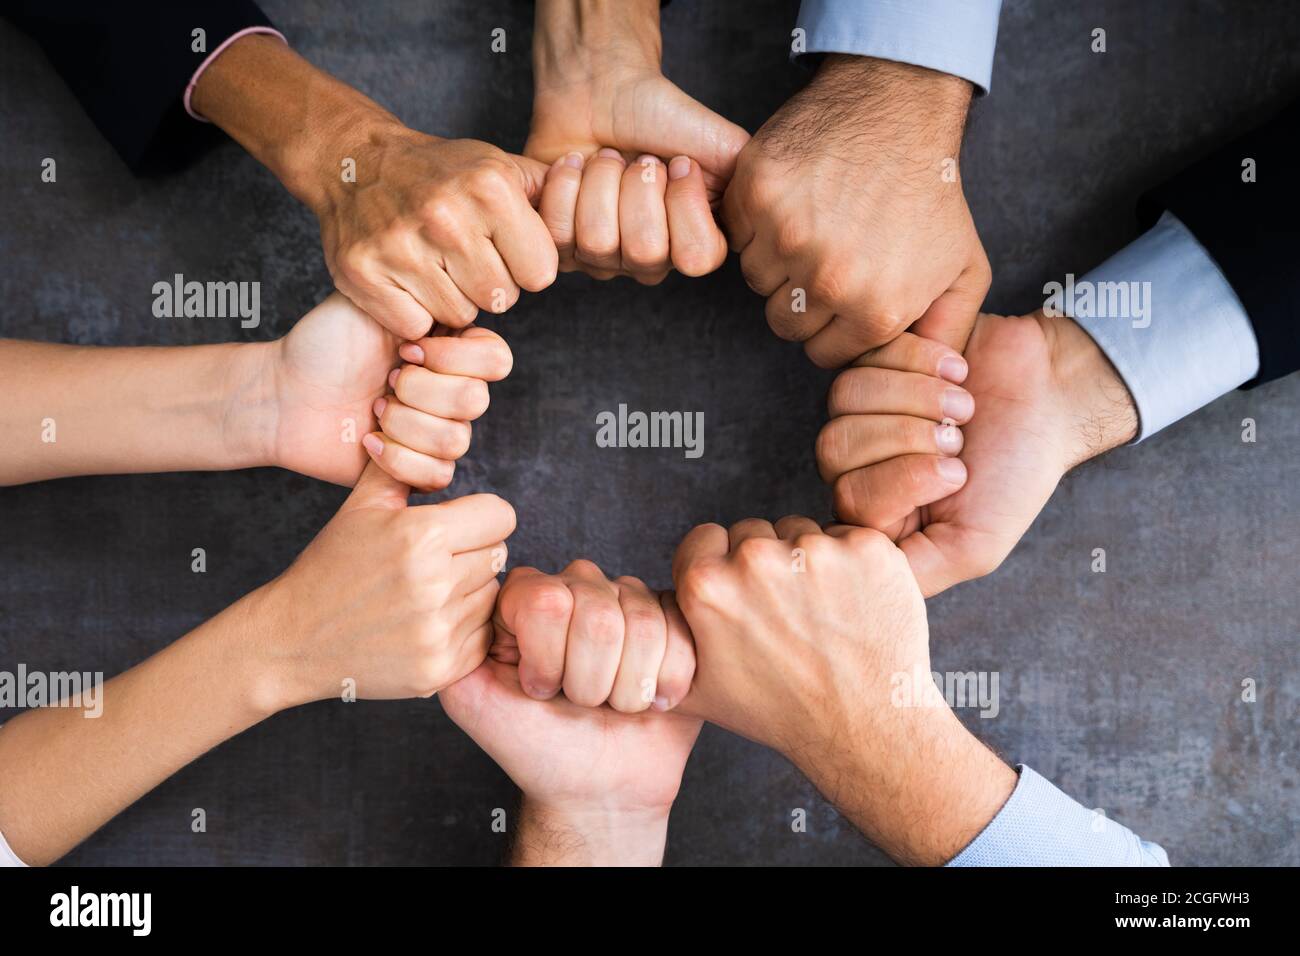 Team Hands Together In Circle. Group Cohesion Stock Photo